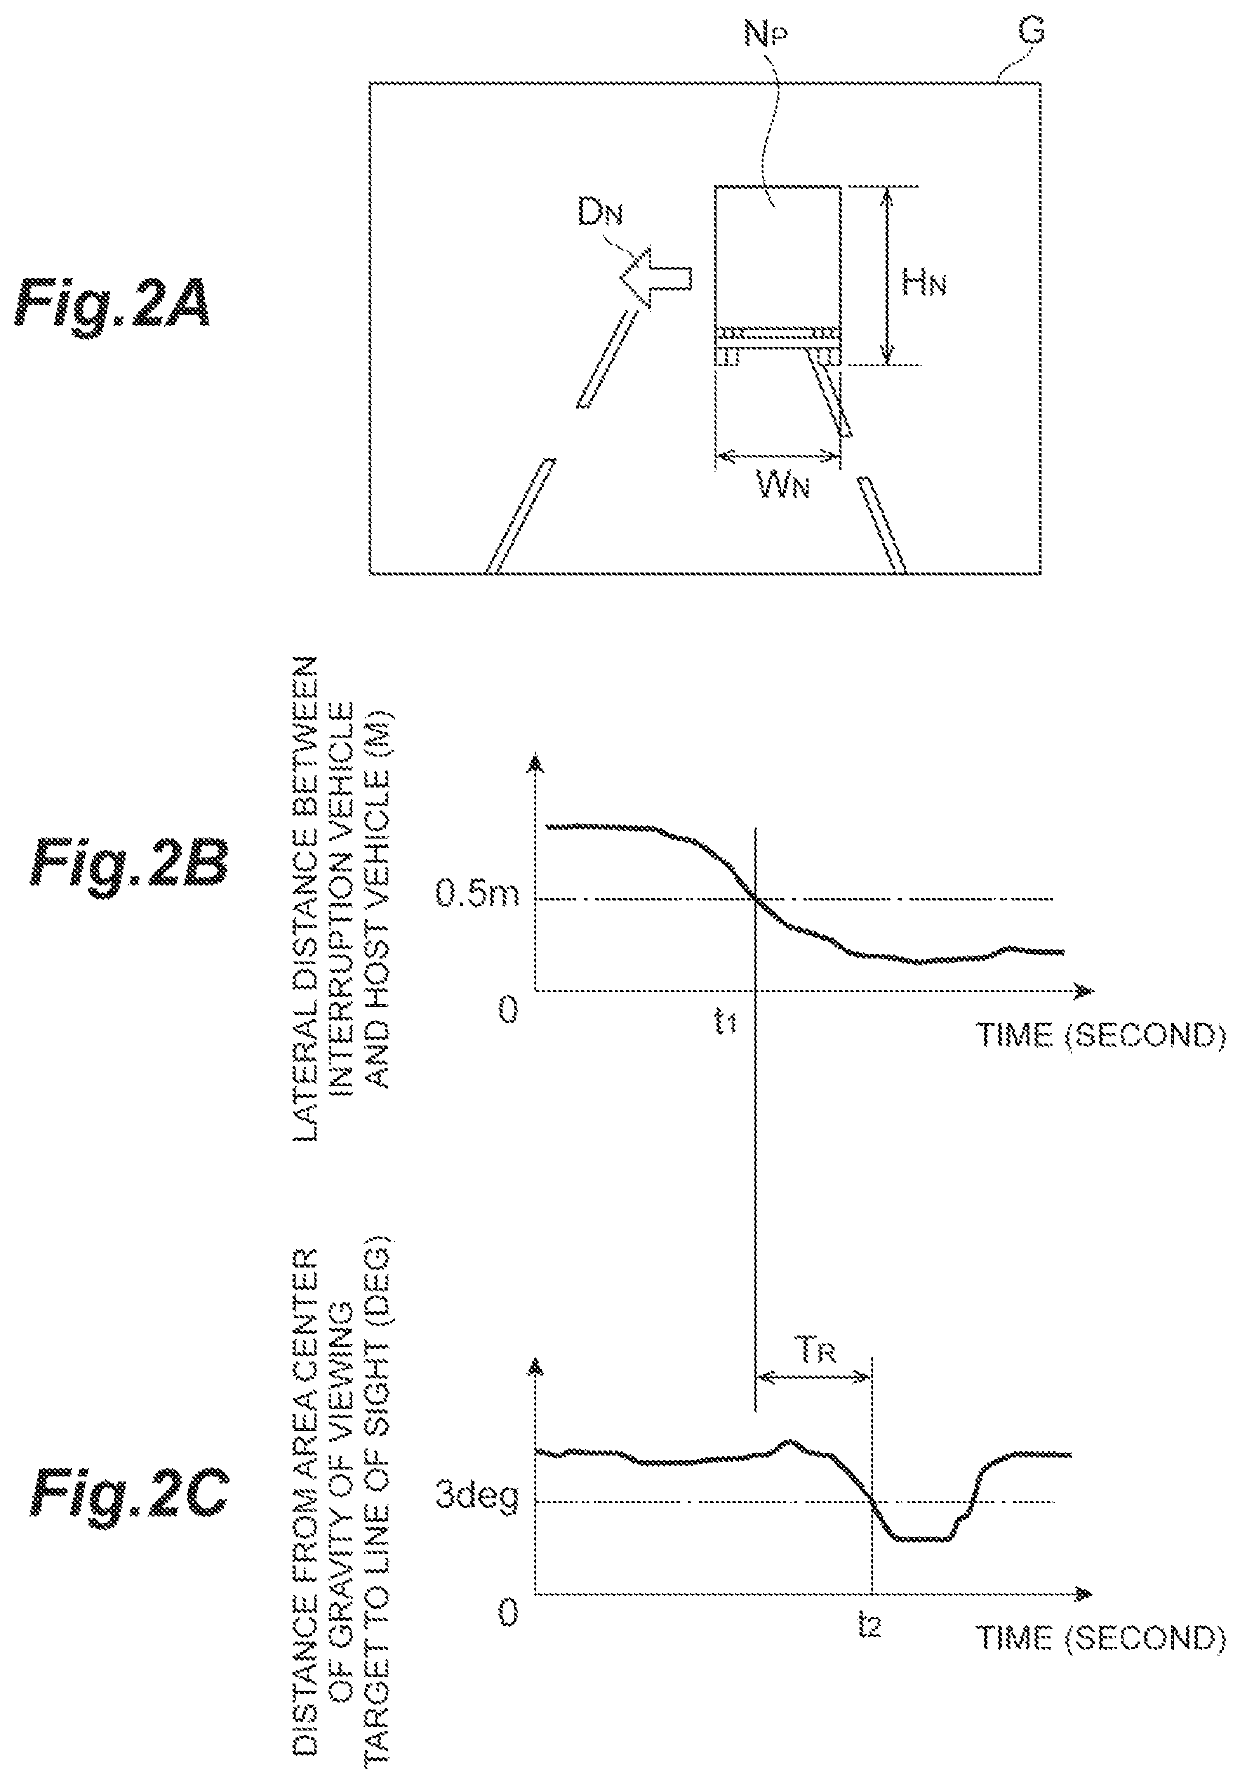 Driving consciousness estimation device